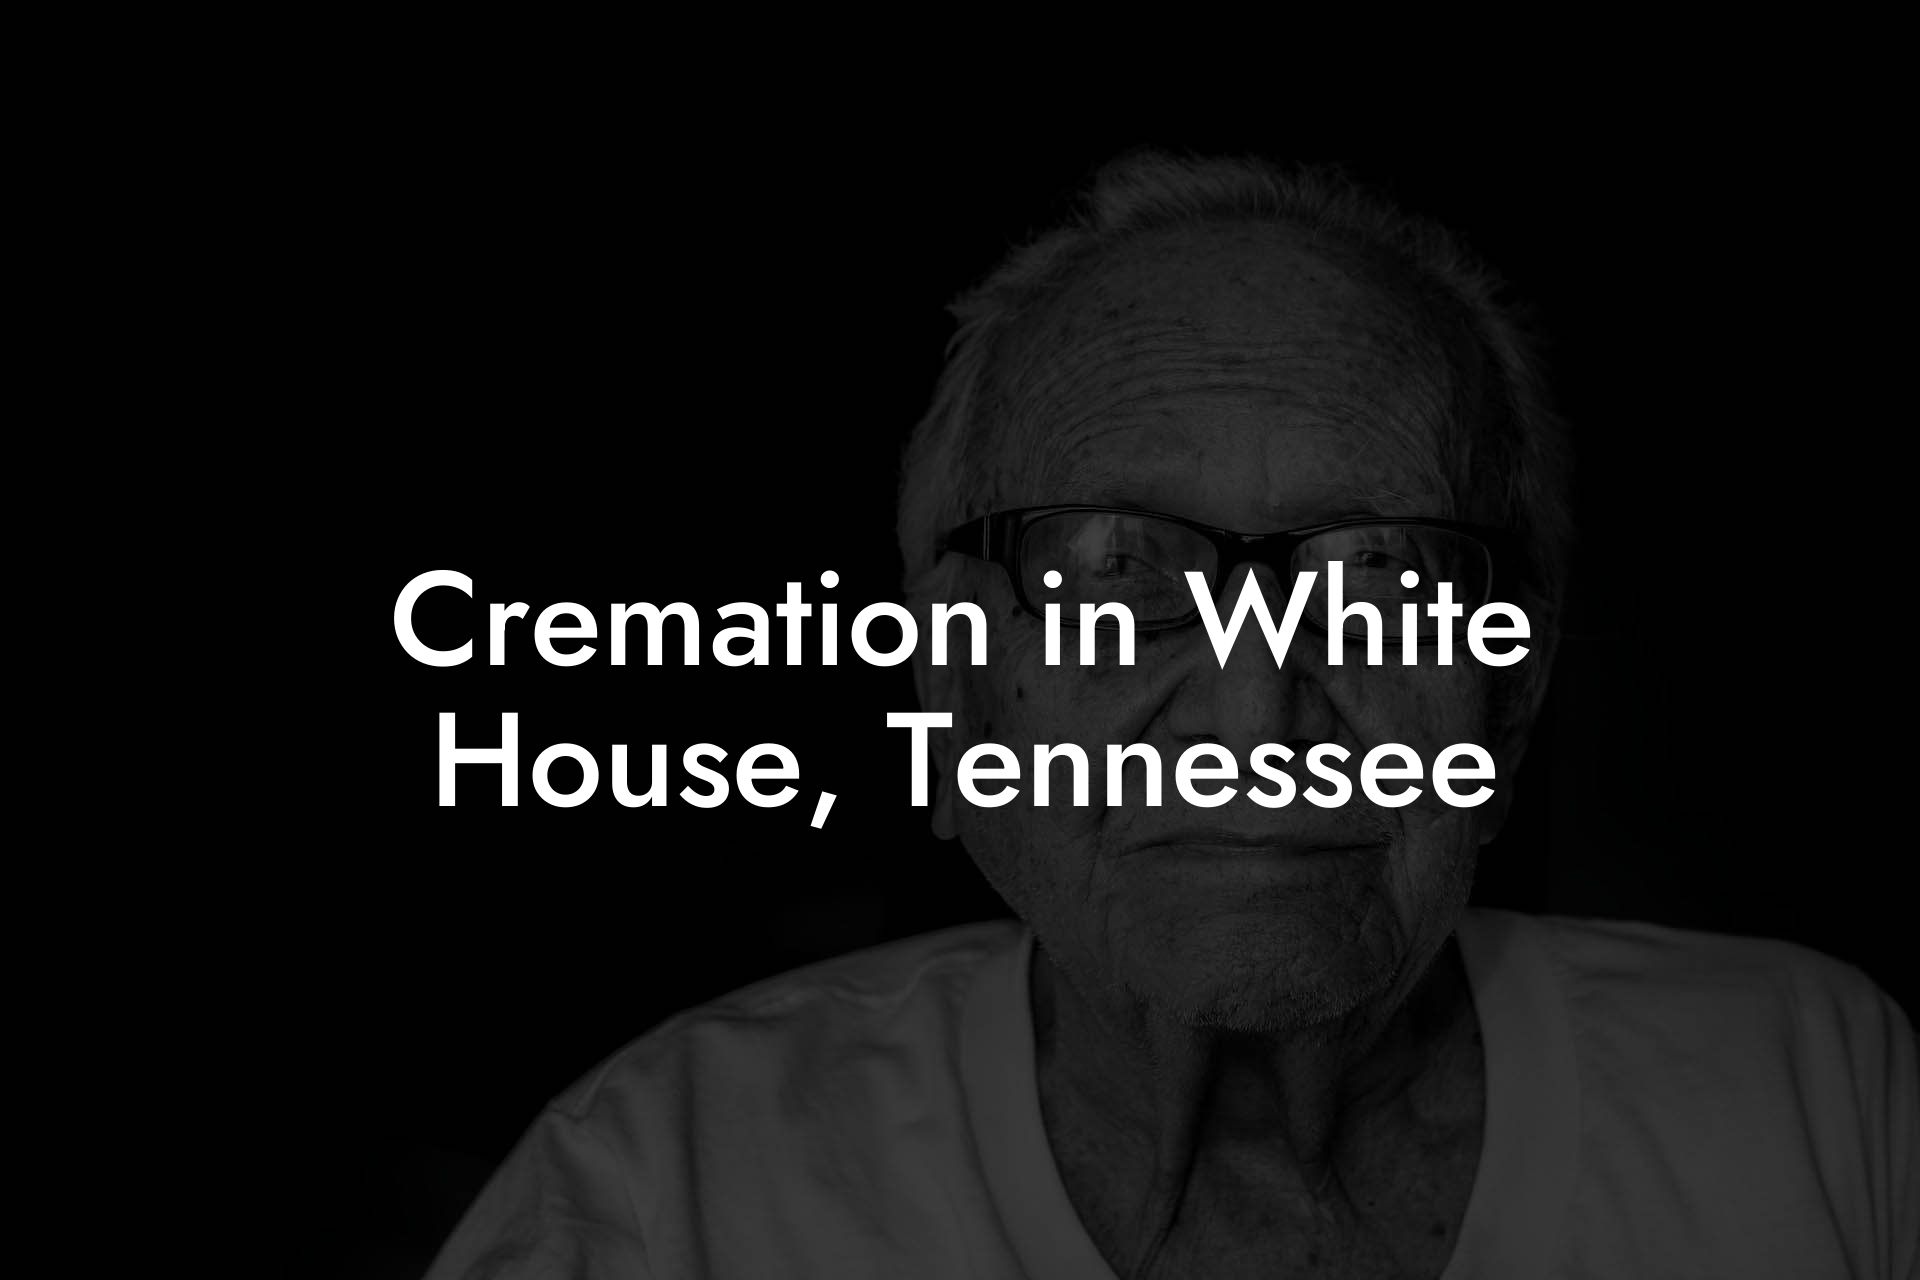 Cremation in White House, Tennessee